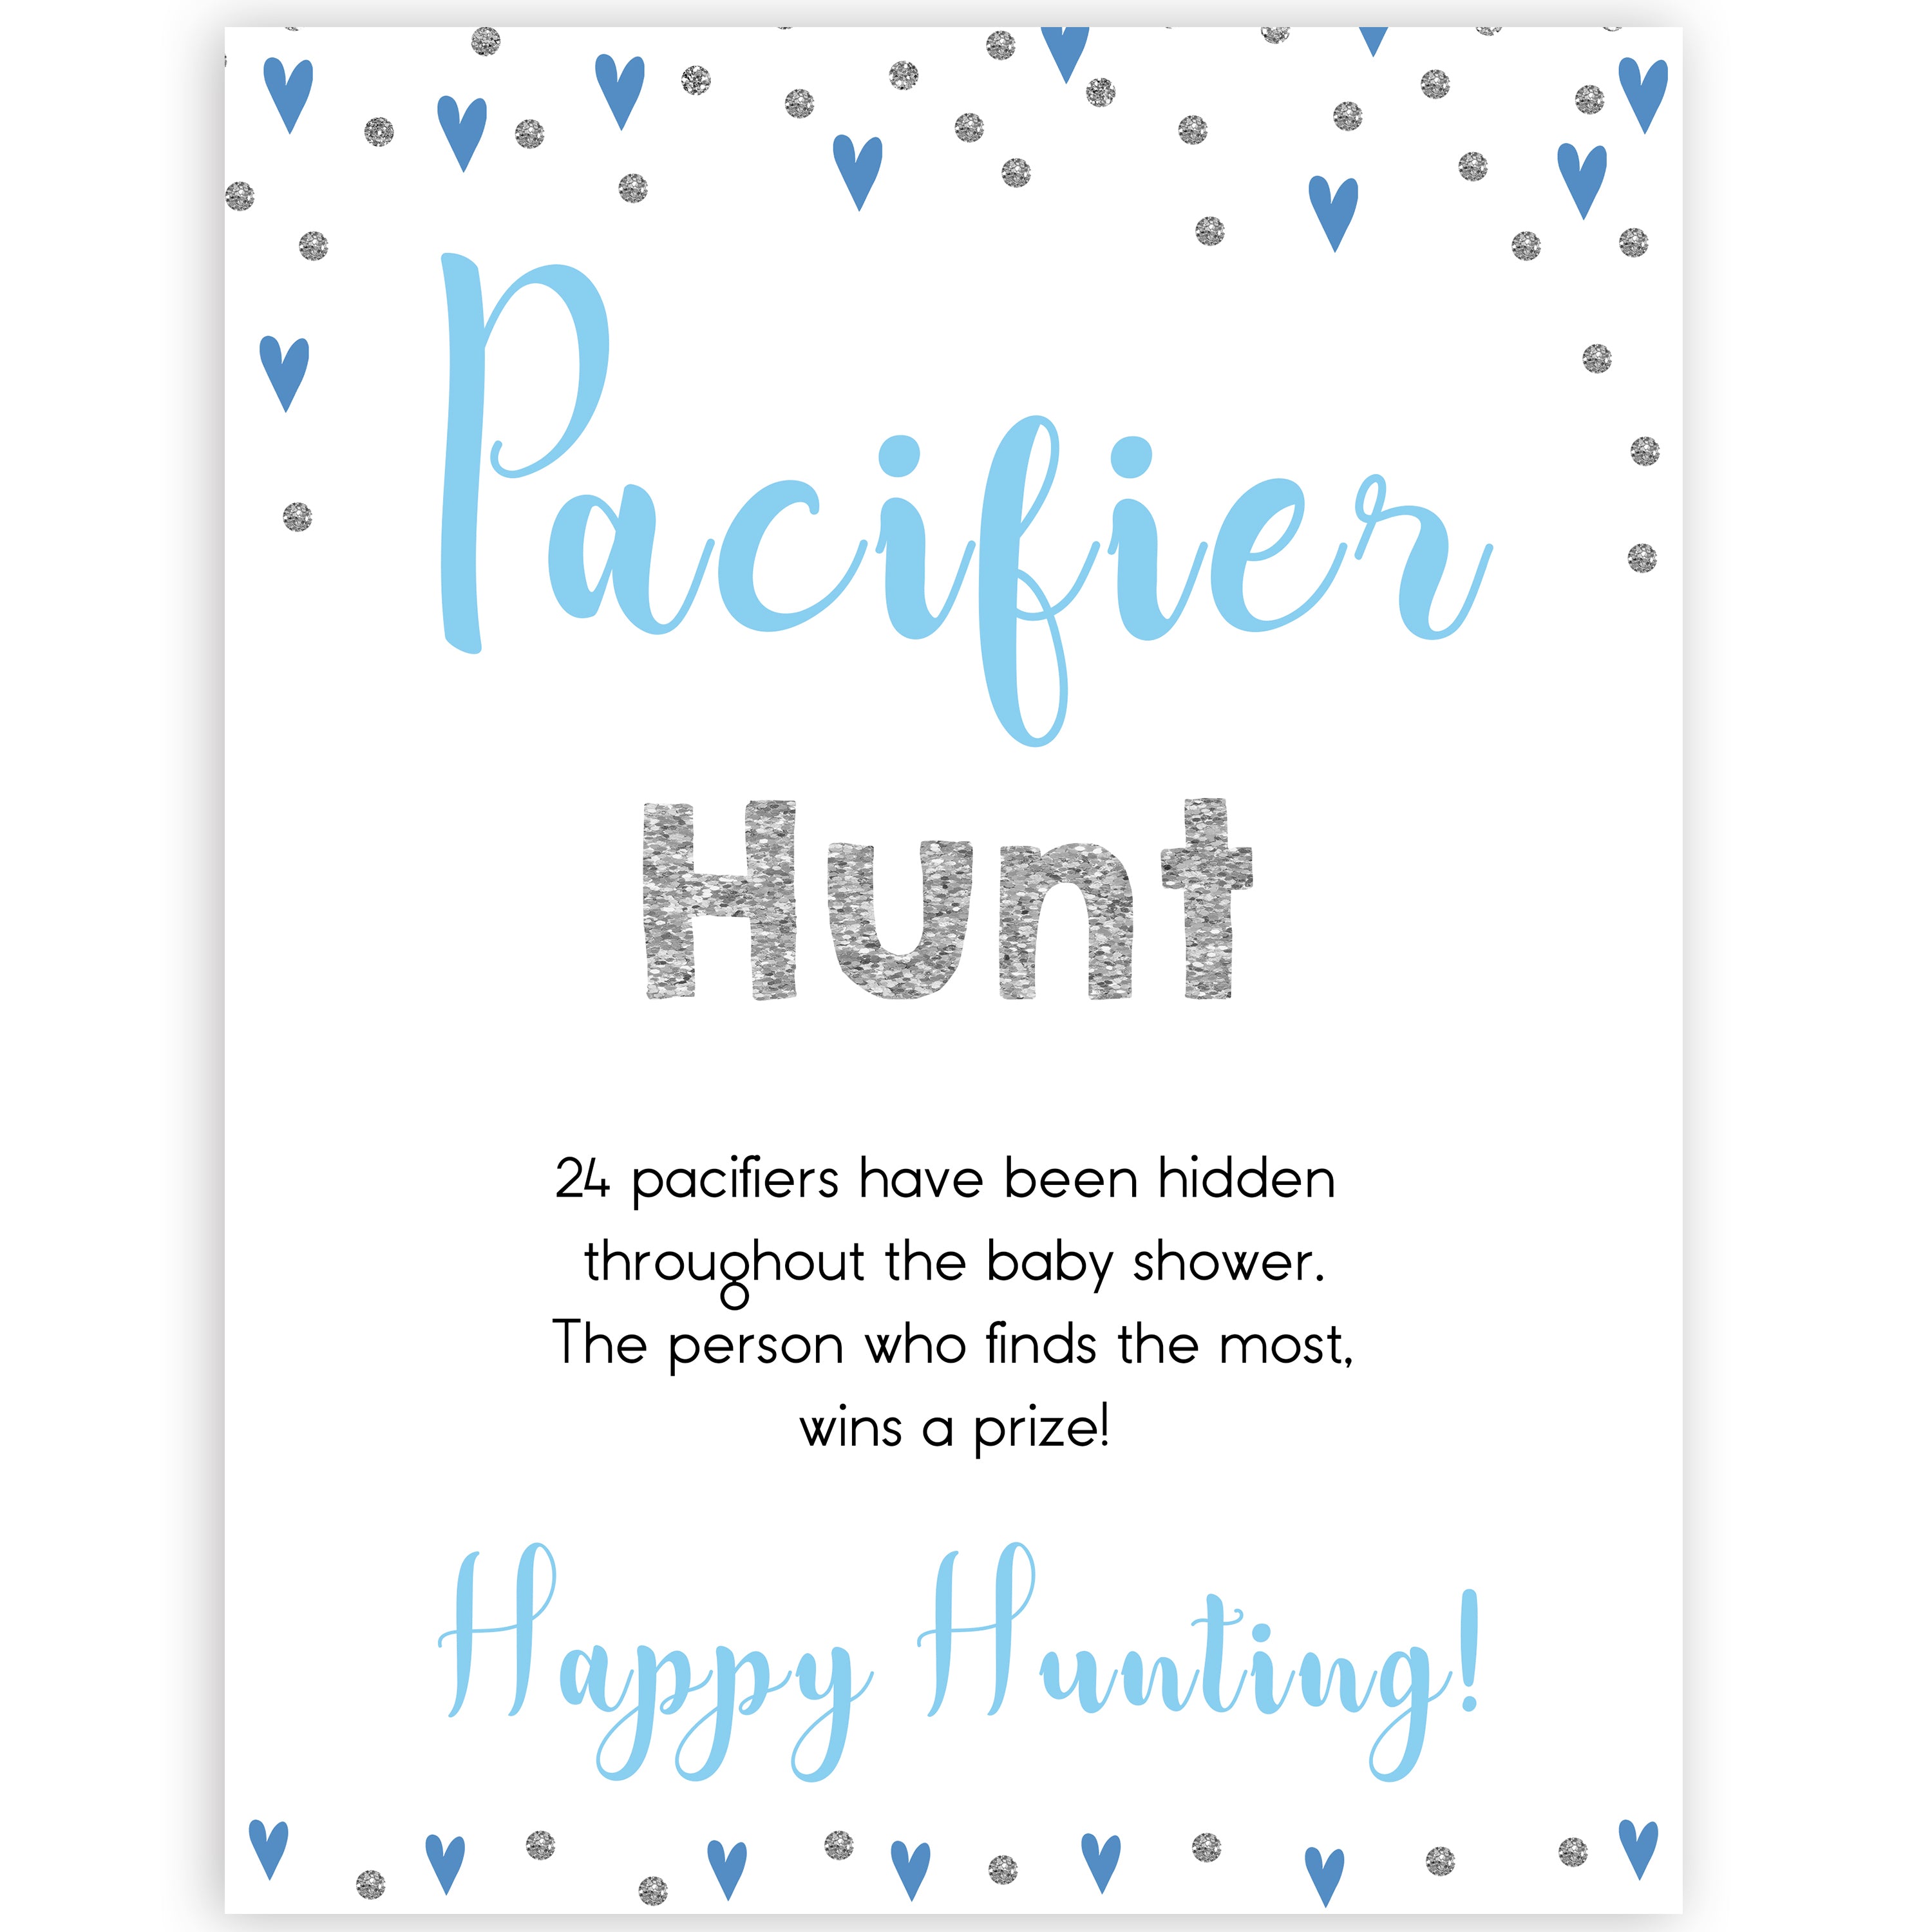 pacifier hunt game, Printable baby shower games, small blue hearts fun baby games, baby shower games, fun baby shower ideas, top baby shower ideas, silver baby shower, blue hearts baby shower ideas